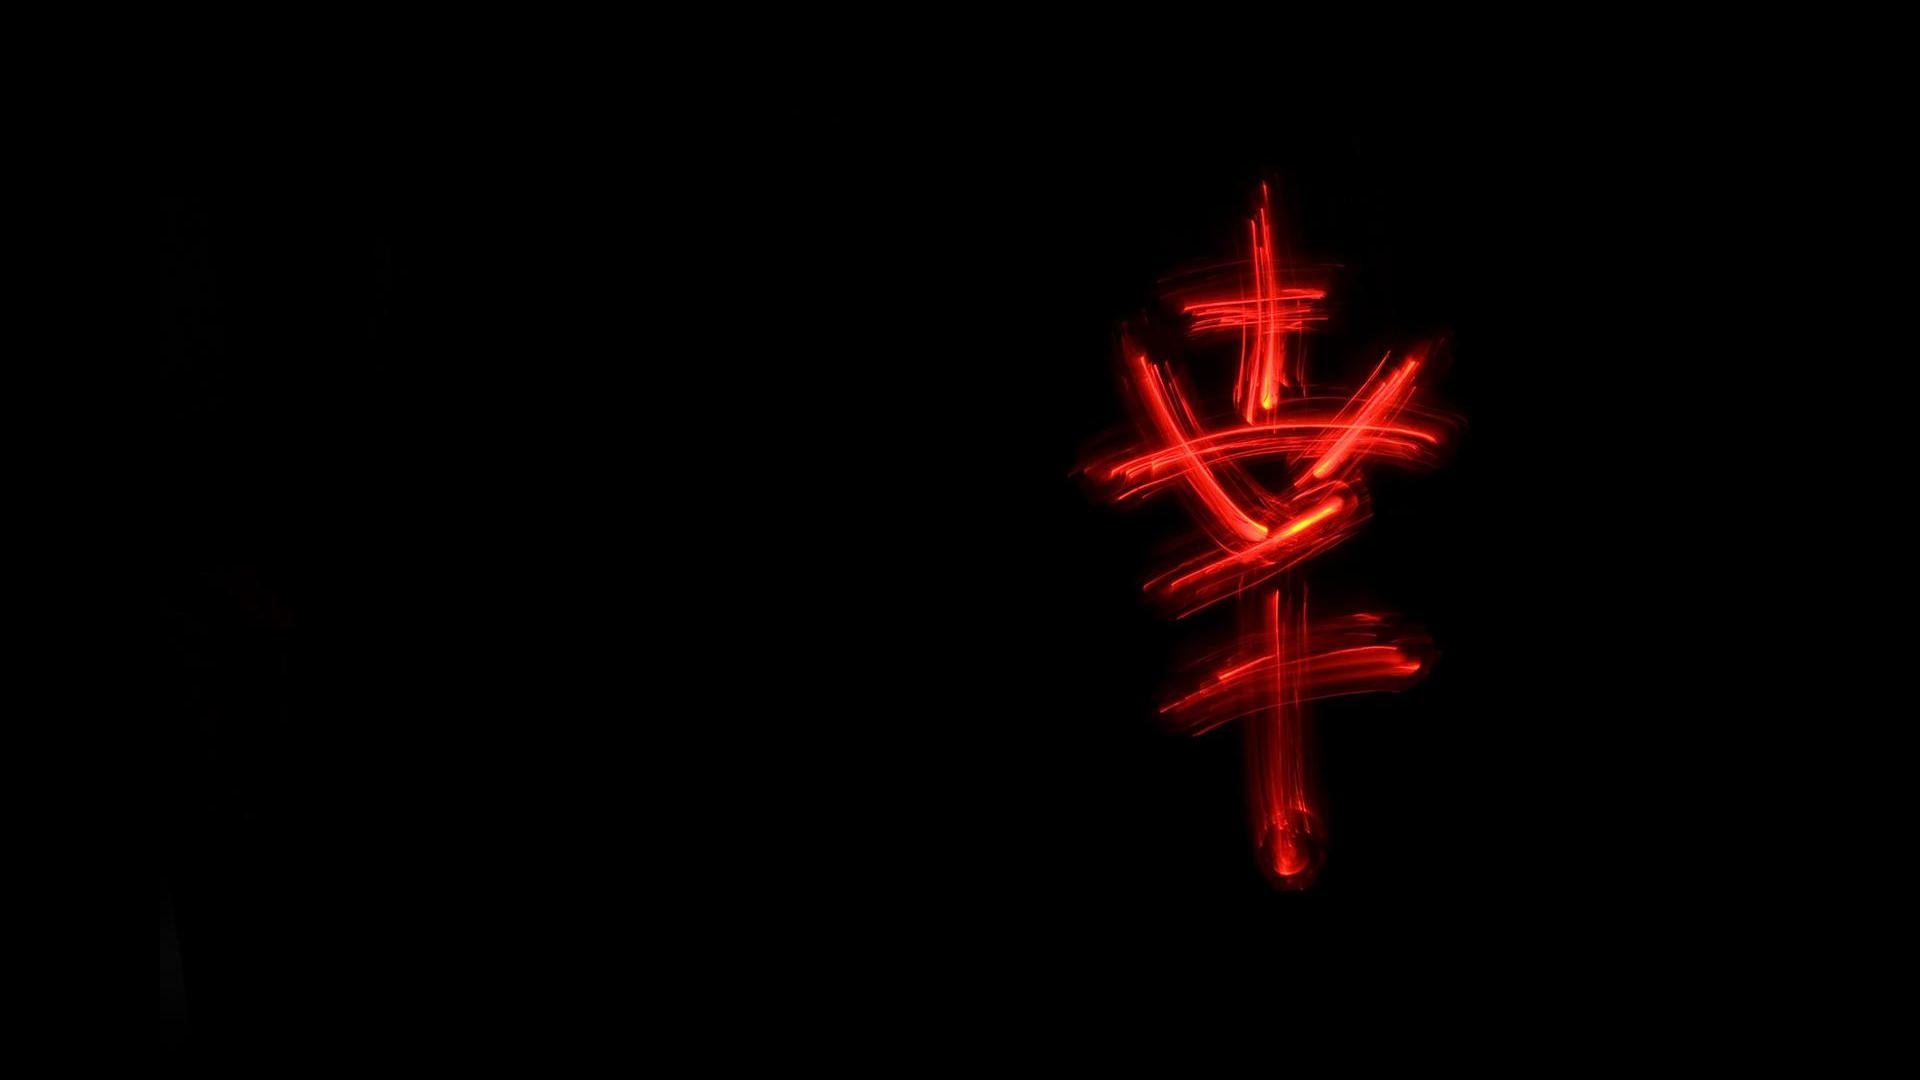 CHINESE LETTER WALLPAPER   79163   HD Wallpapers   [WallpapersInHQ 1920x1080